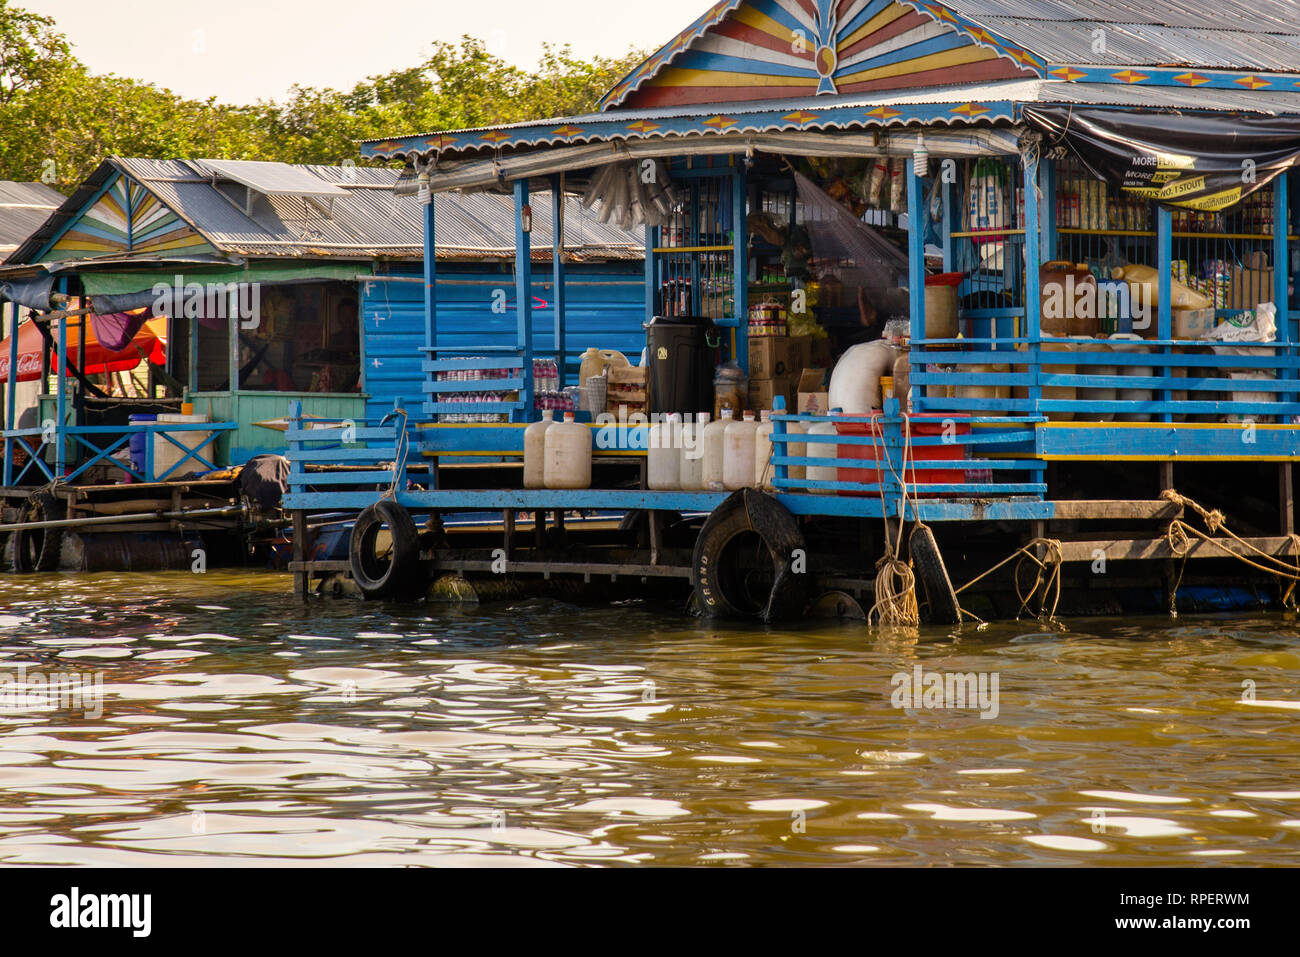 Vernacular architecture of the floating village of Chong Khneas on Tonle Sap Lake in Cambodia. Stock Photo